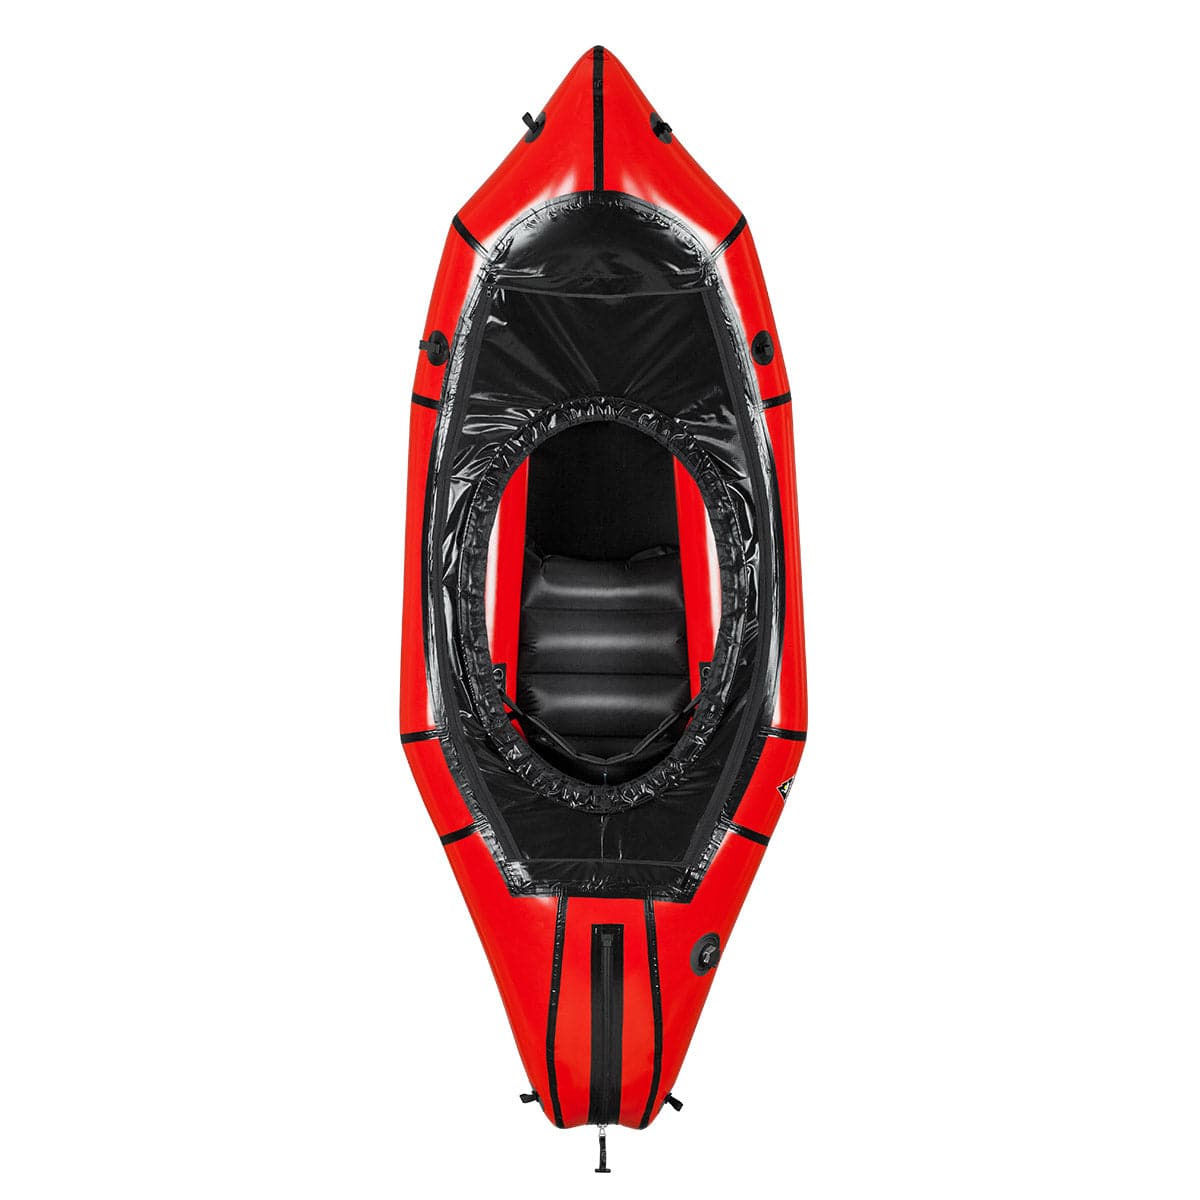 Featuring the Expedition with Removable Deck pack raft manufactured by Alpacka shown here from a third angle.